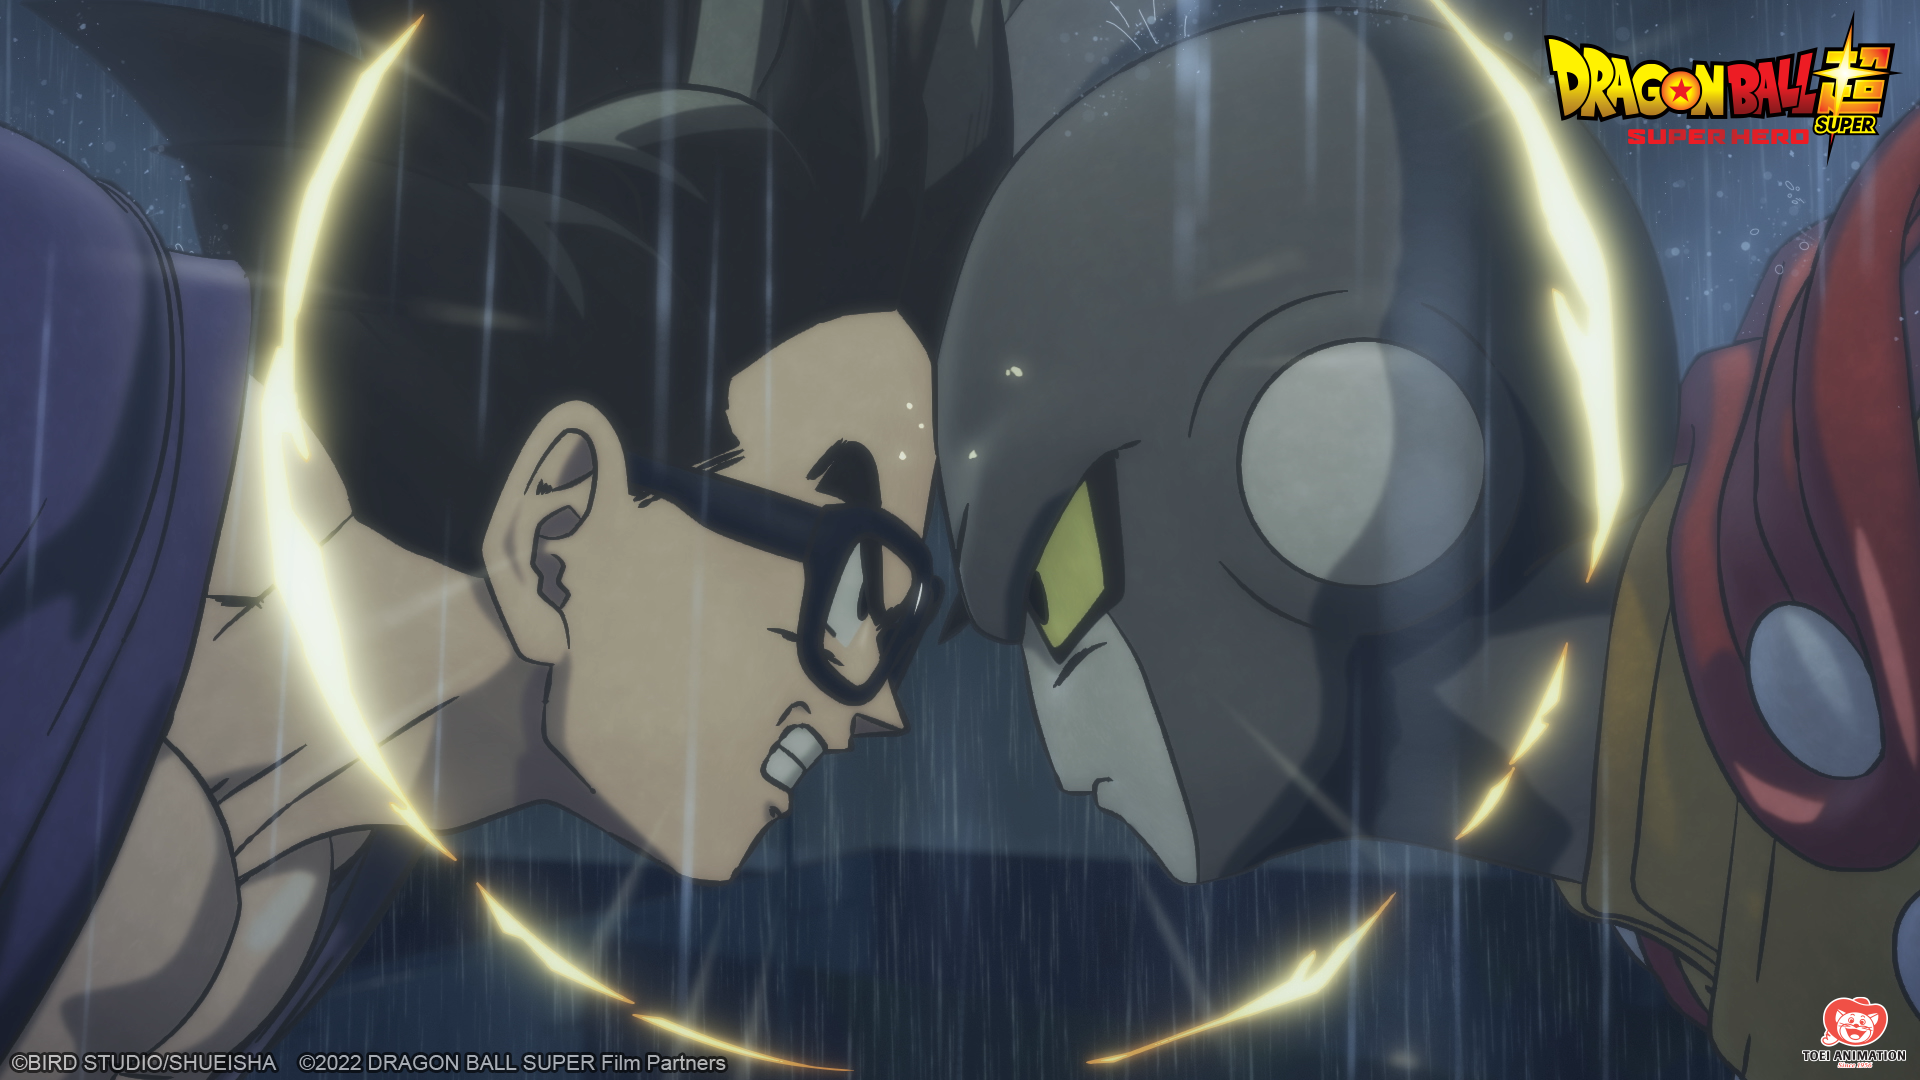 Gohan fighting the villain of 'Dragon Ball Super: Super Hero,' which has an August release date worldwide. The two have their heads up against one another and look angry.